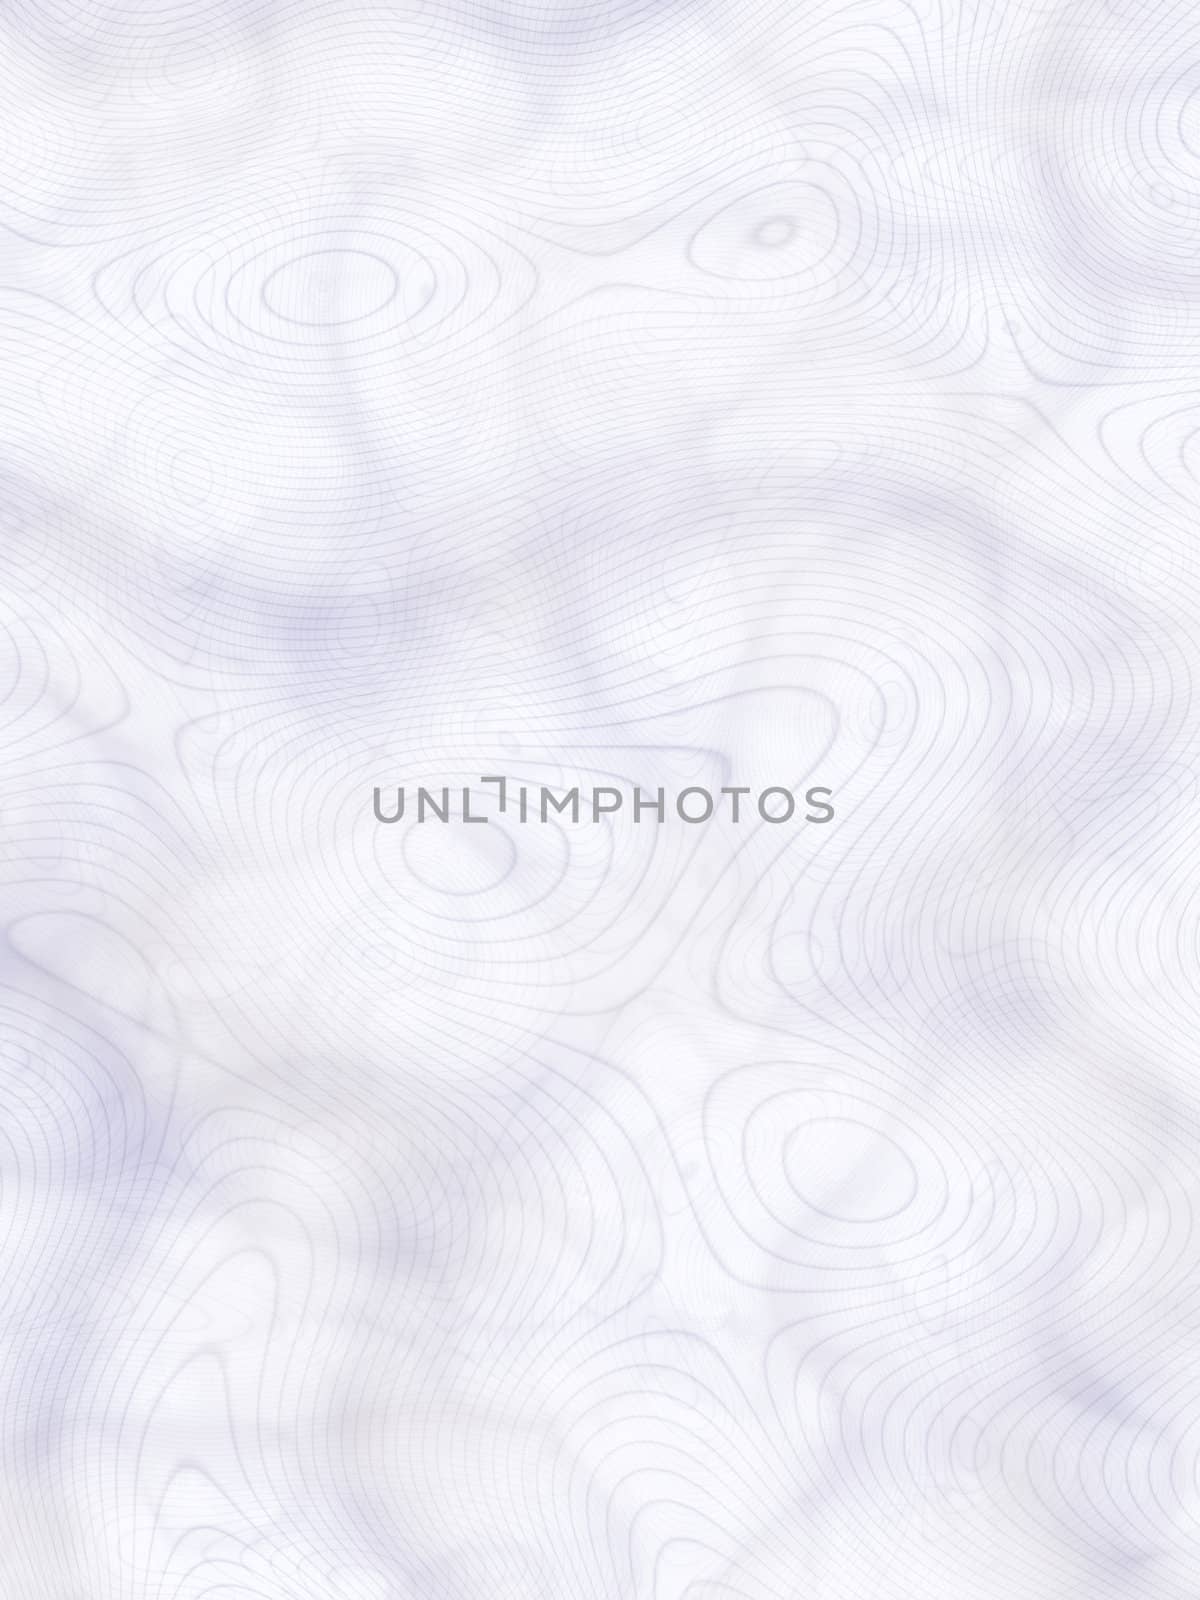 Bitmap Illustration of Abstract Background With Curves